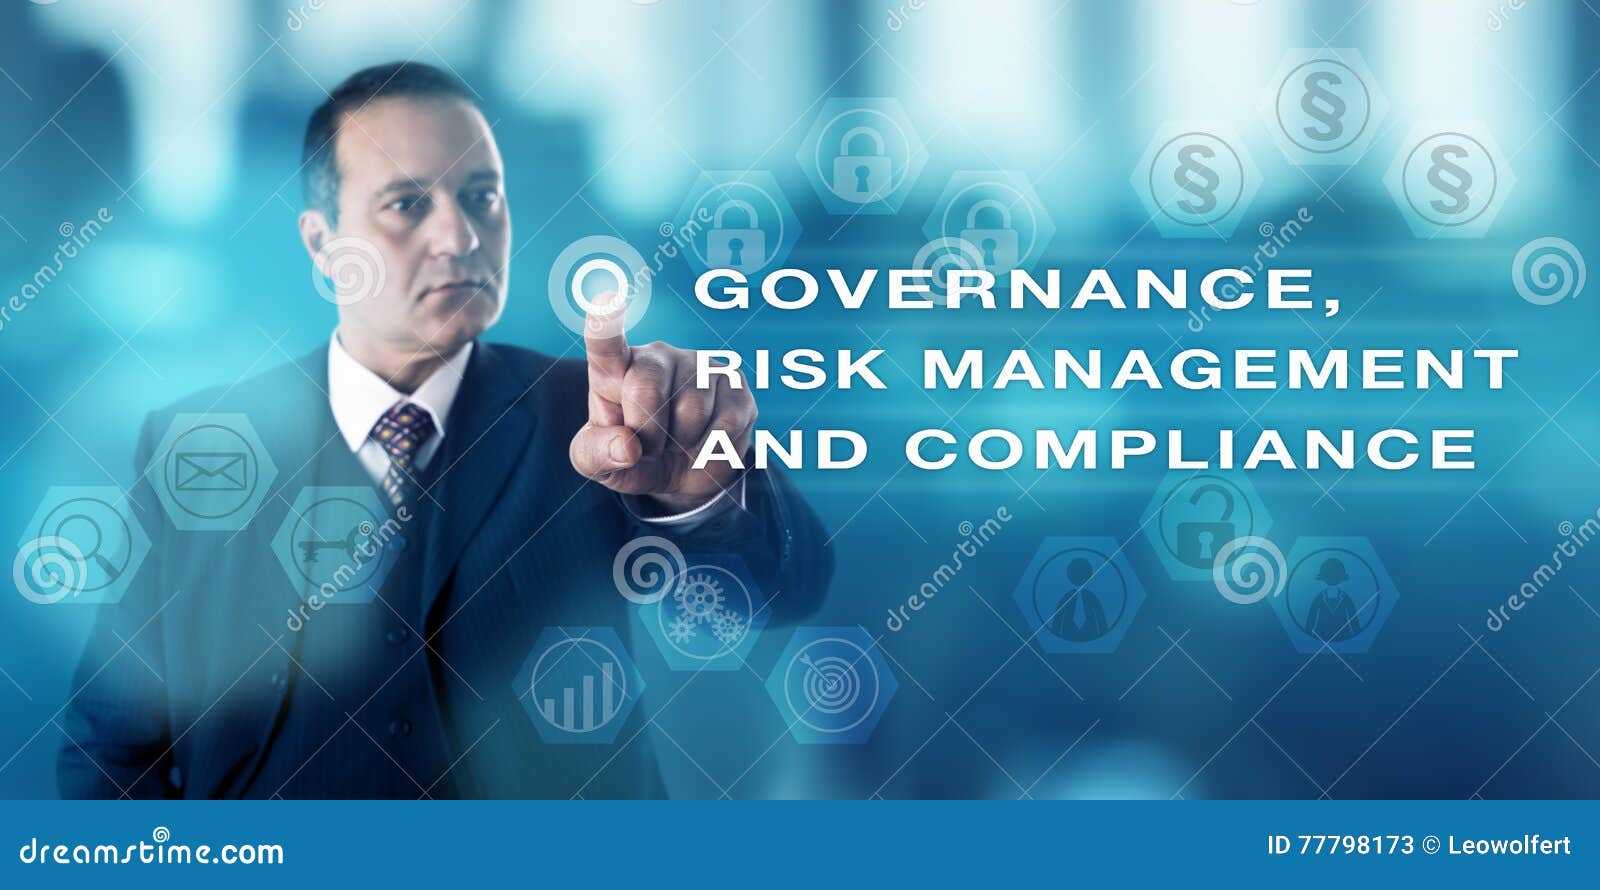 governance, risk management and compliance